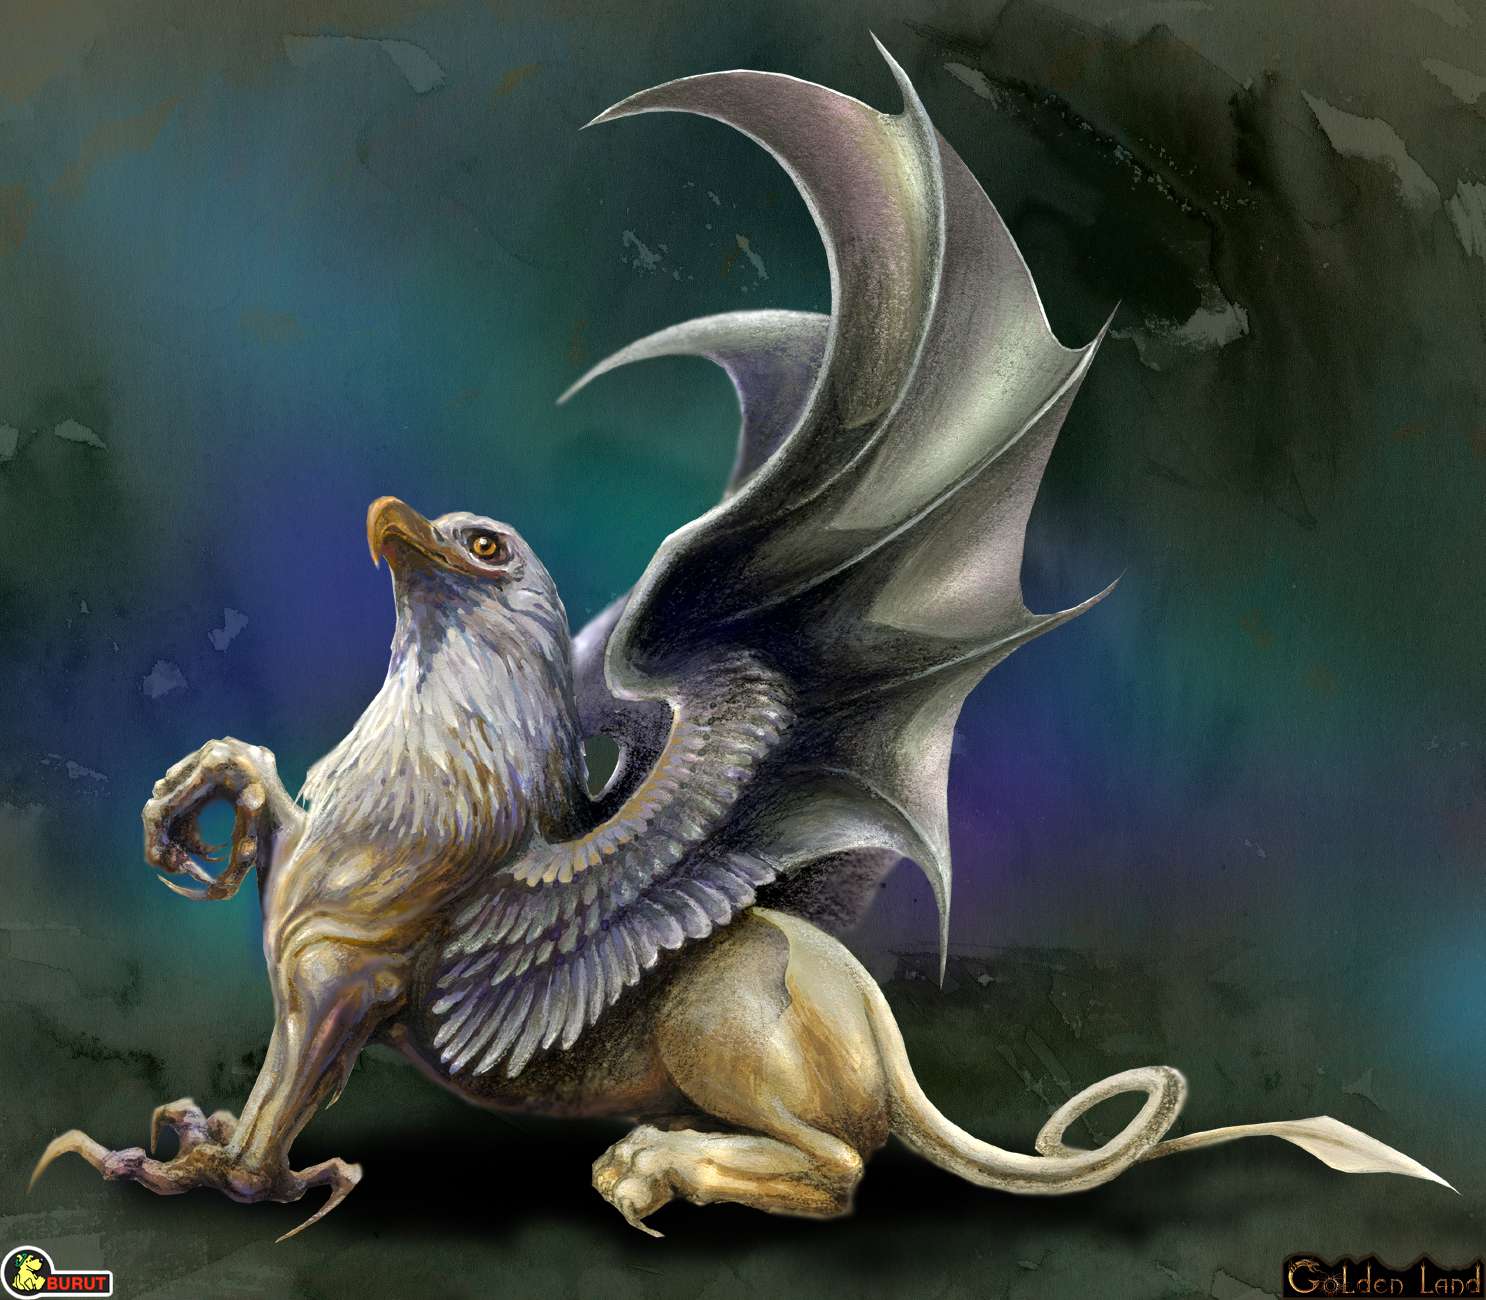 Griffin - Monster Wiki - a reason to leave the closet closed and saw